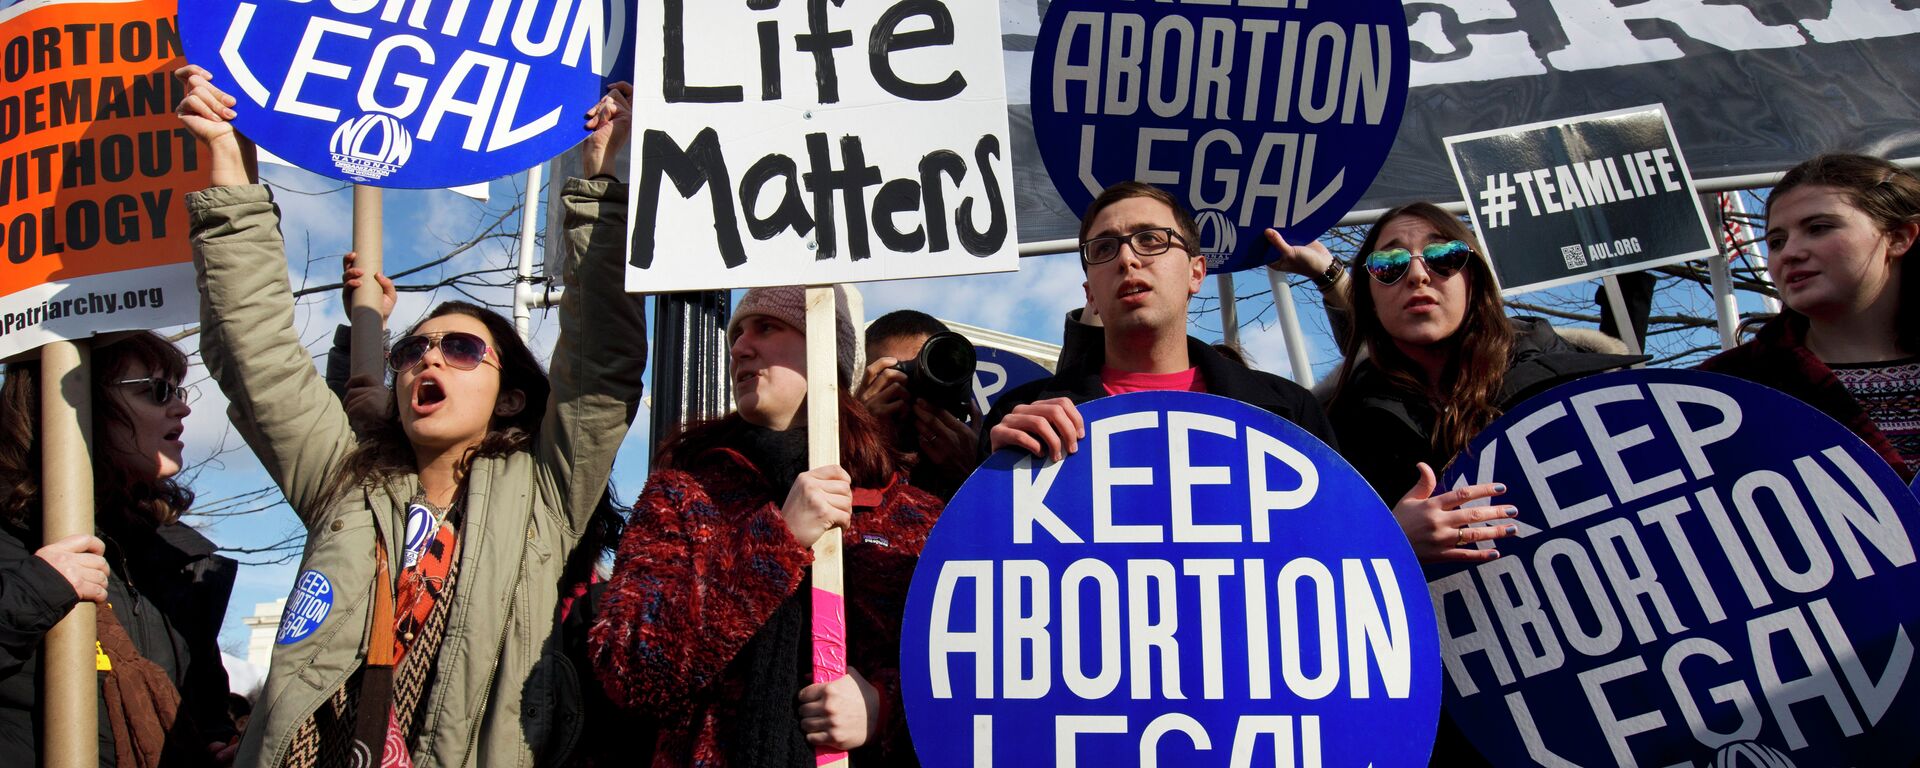 Abortion rights advocates hold signs while anti-abortion demonstrators walk by during the annual March for Life in Washington, DC. - Sputnik International, 1920, 23.09.2021